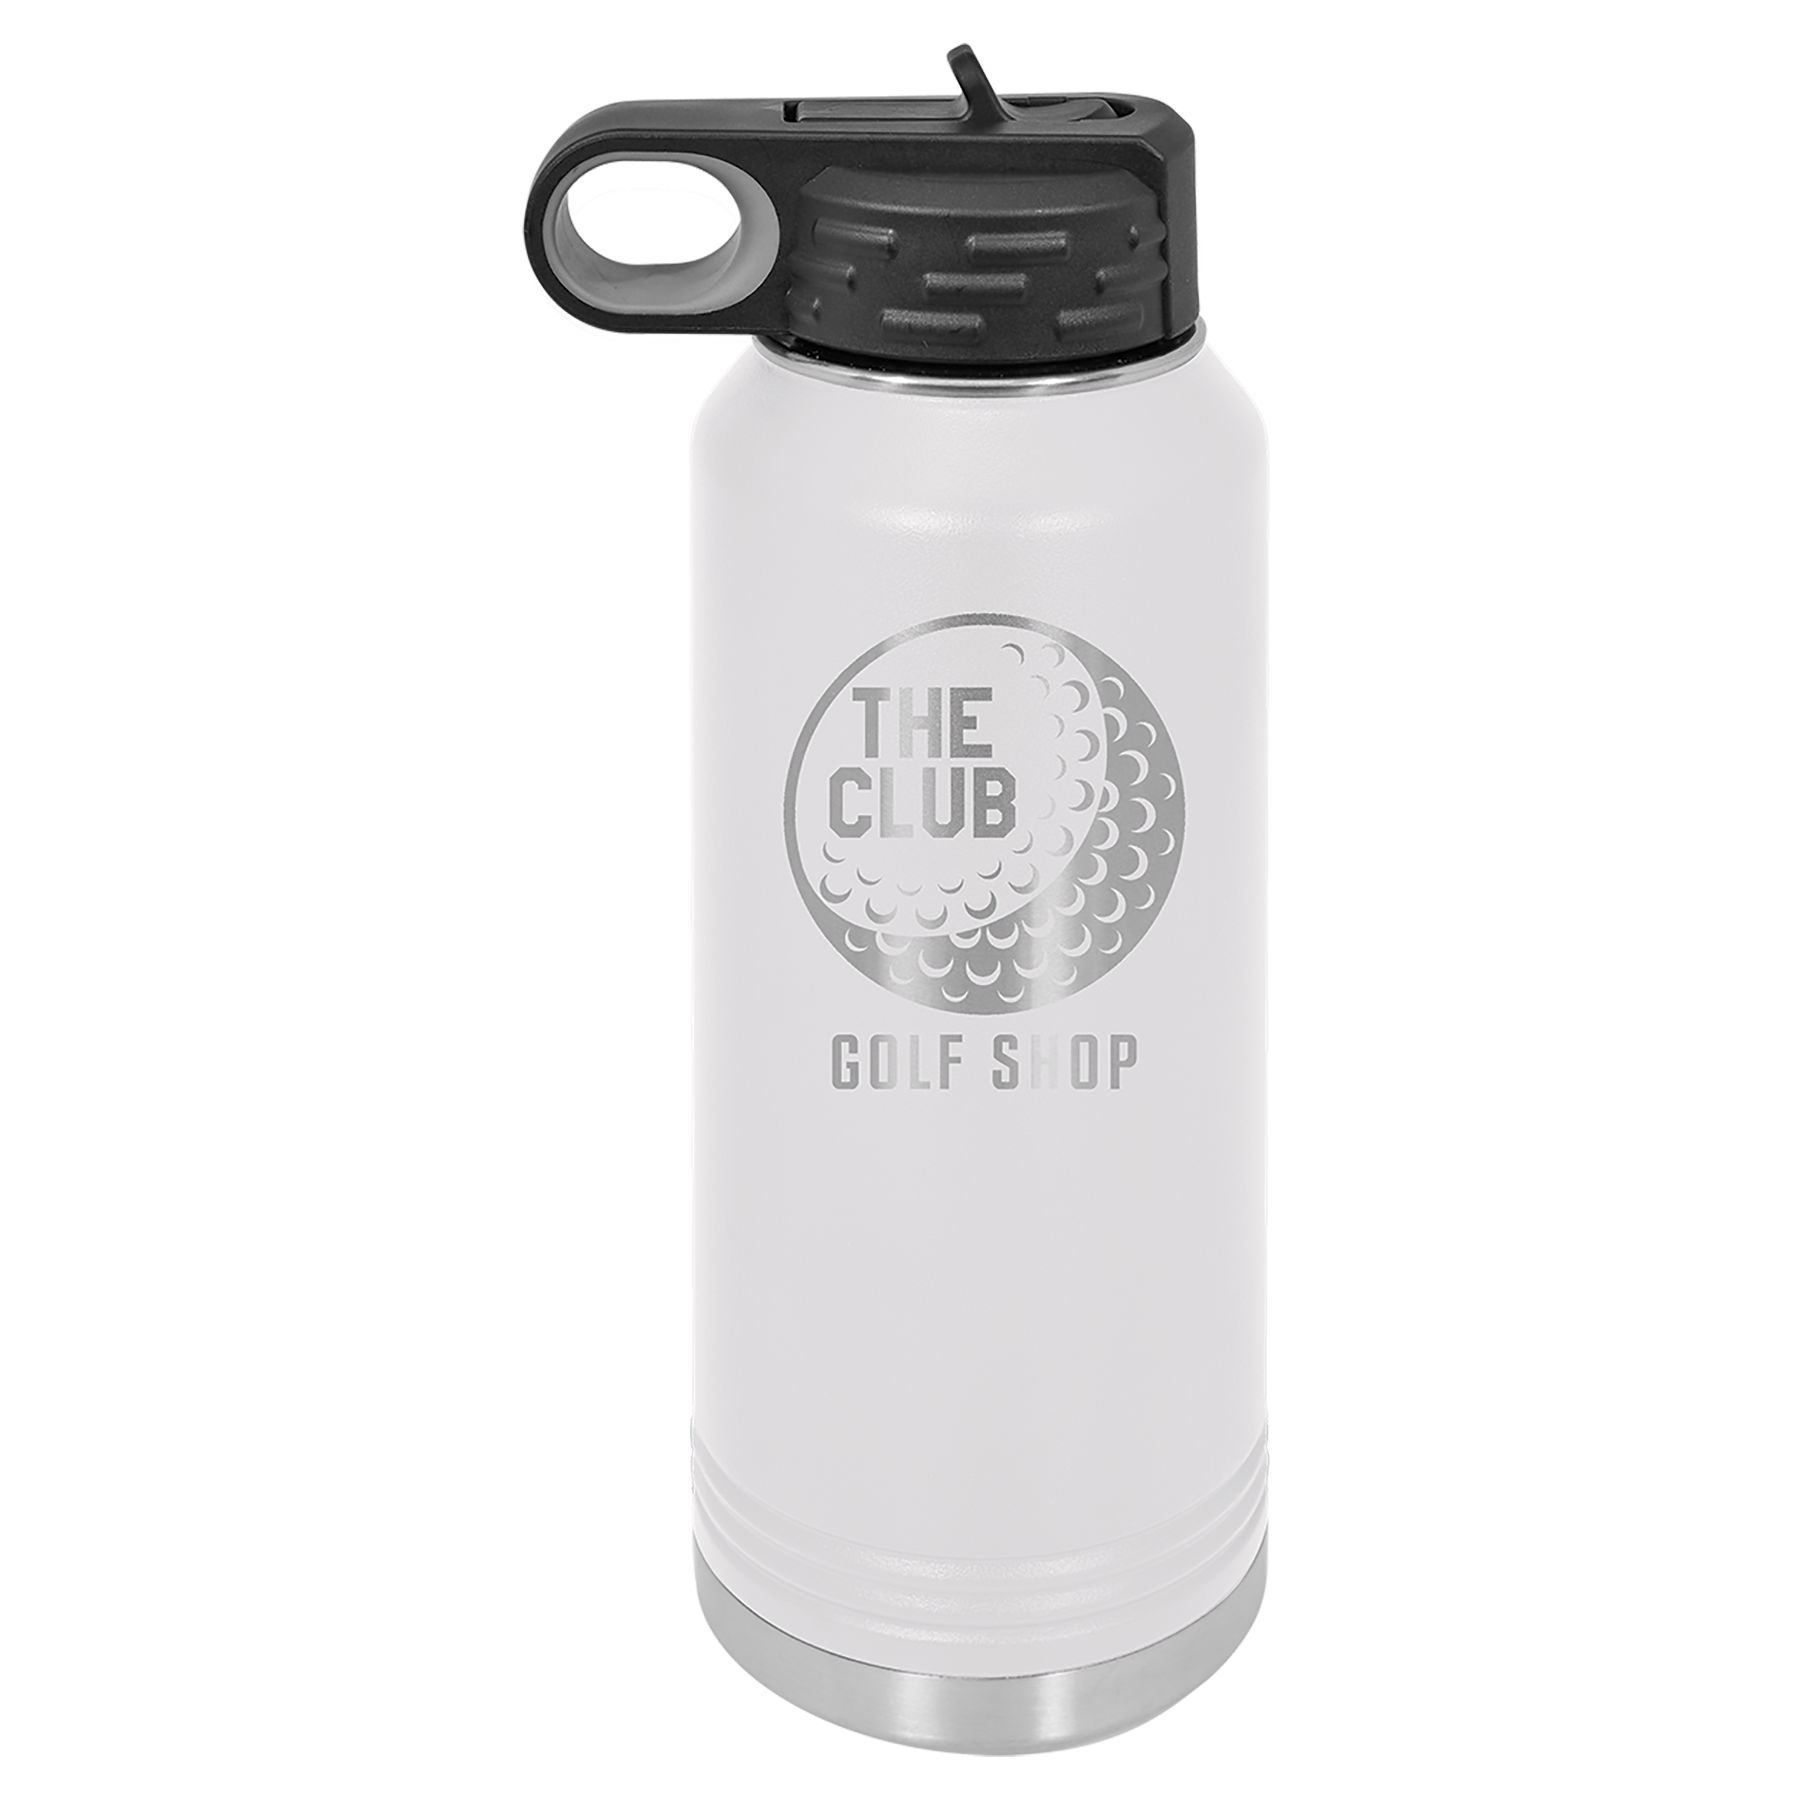 32 oz. White Stainless Steel Insulated Water Bottle.  Customizable with your personal image or saying.